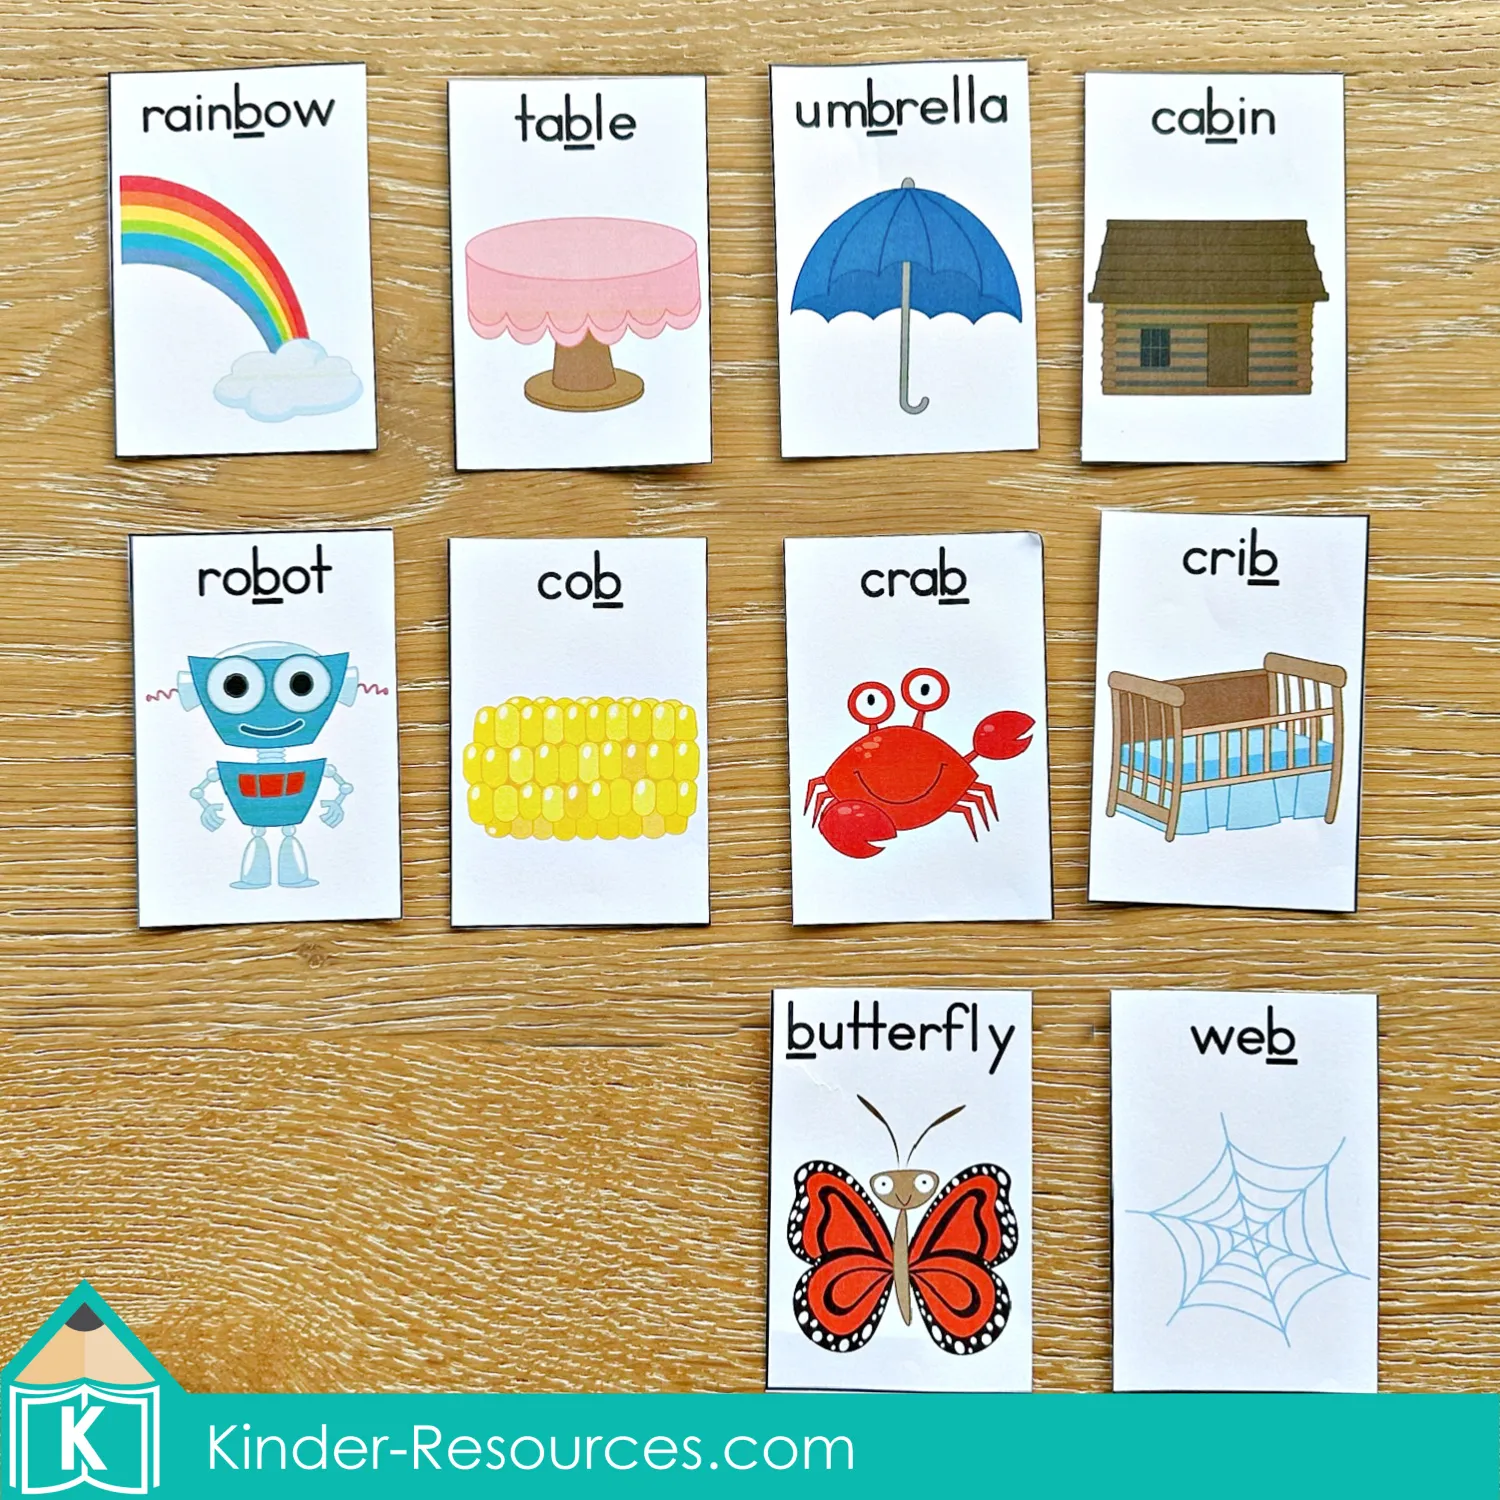 FREE Phonics Letter of the Week B - Kinder Resources